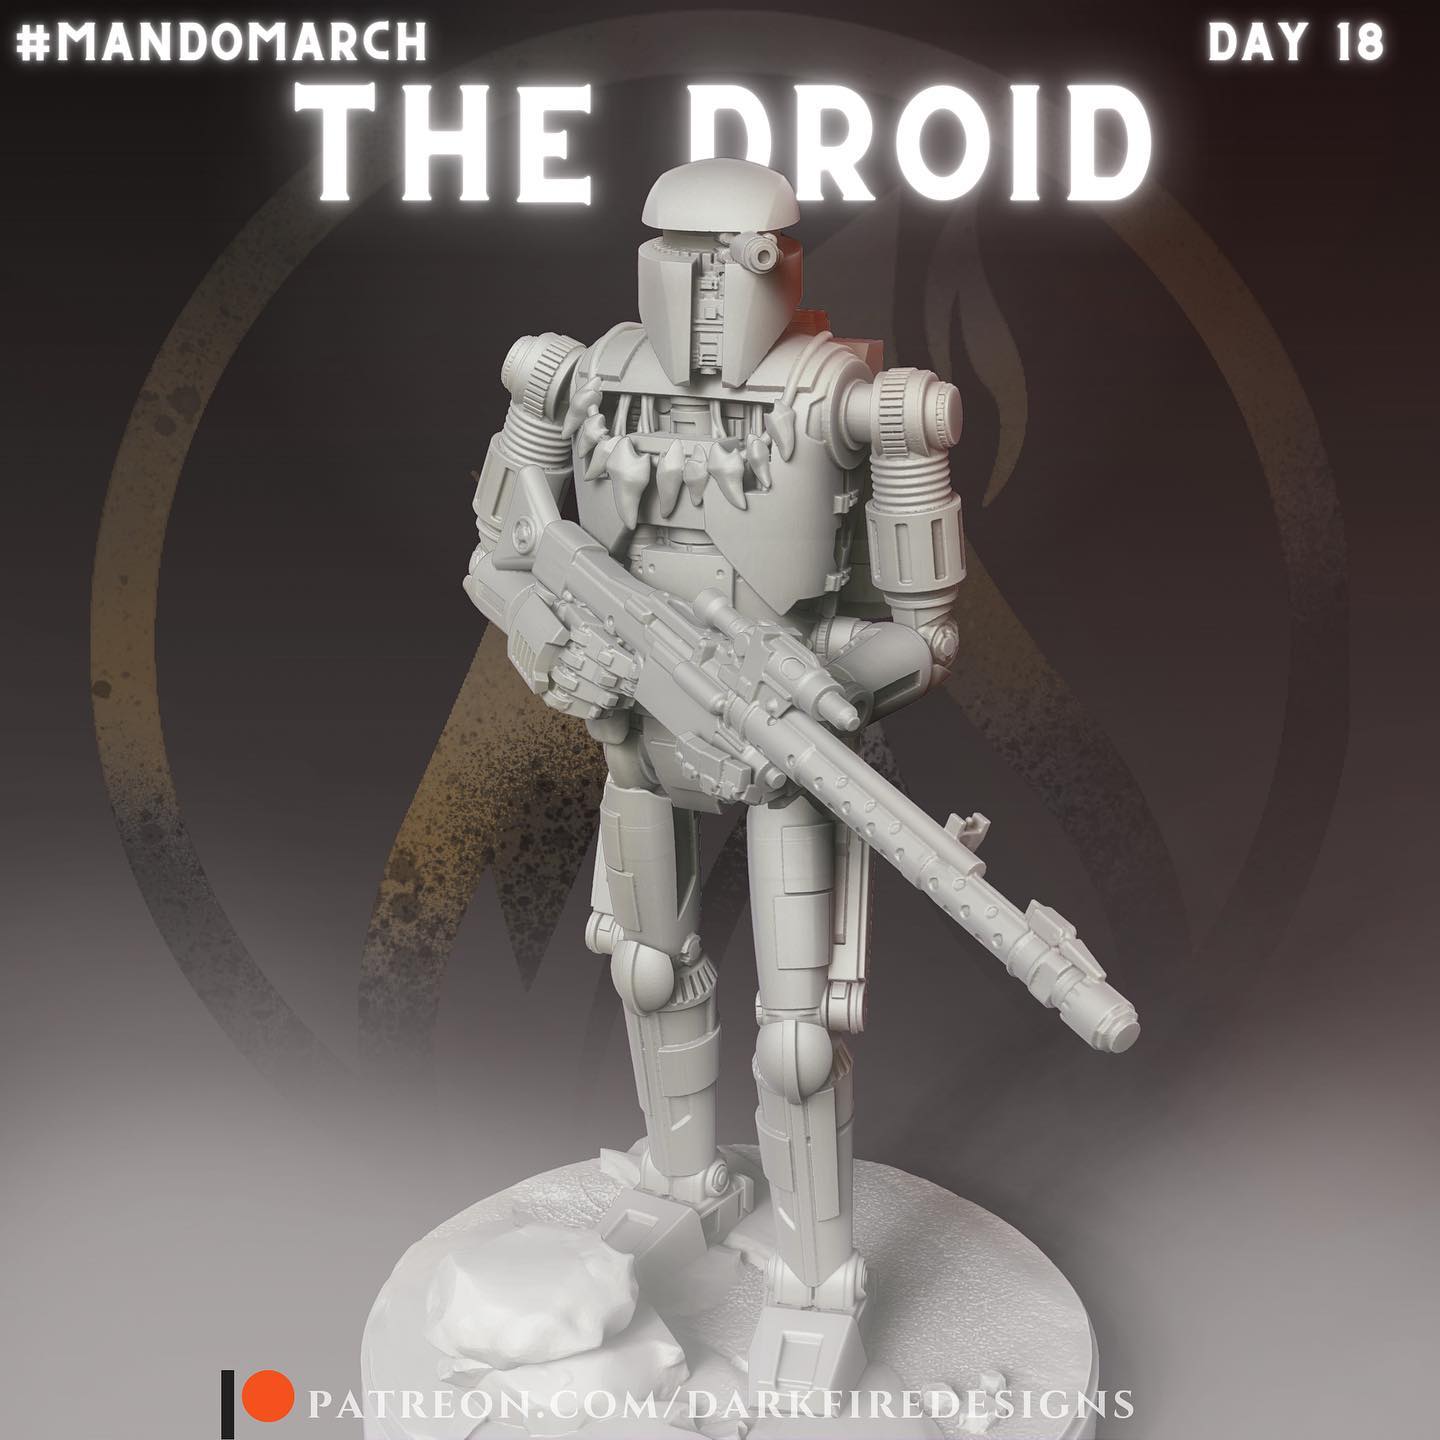 The Droid